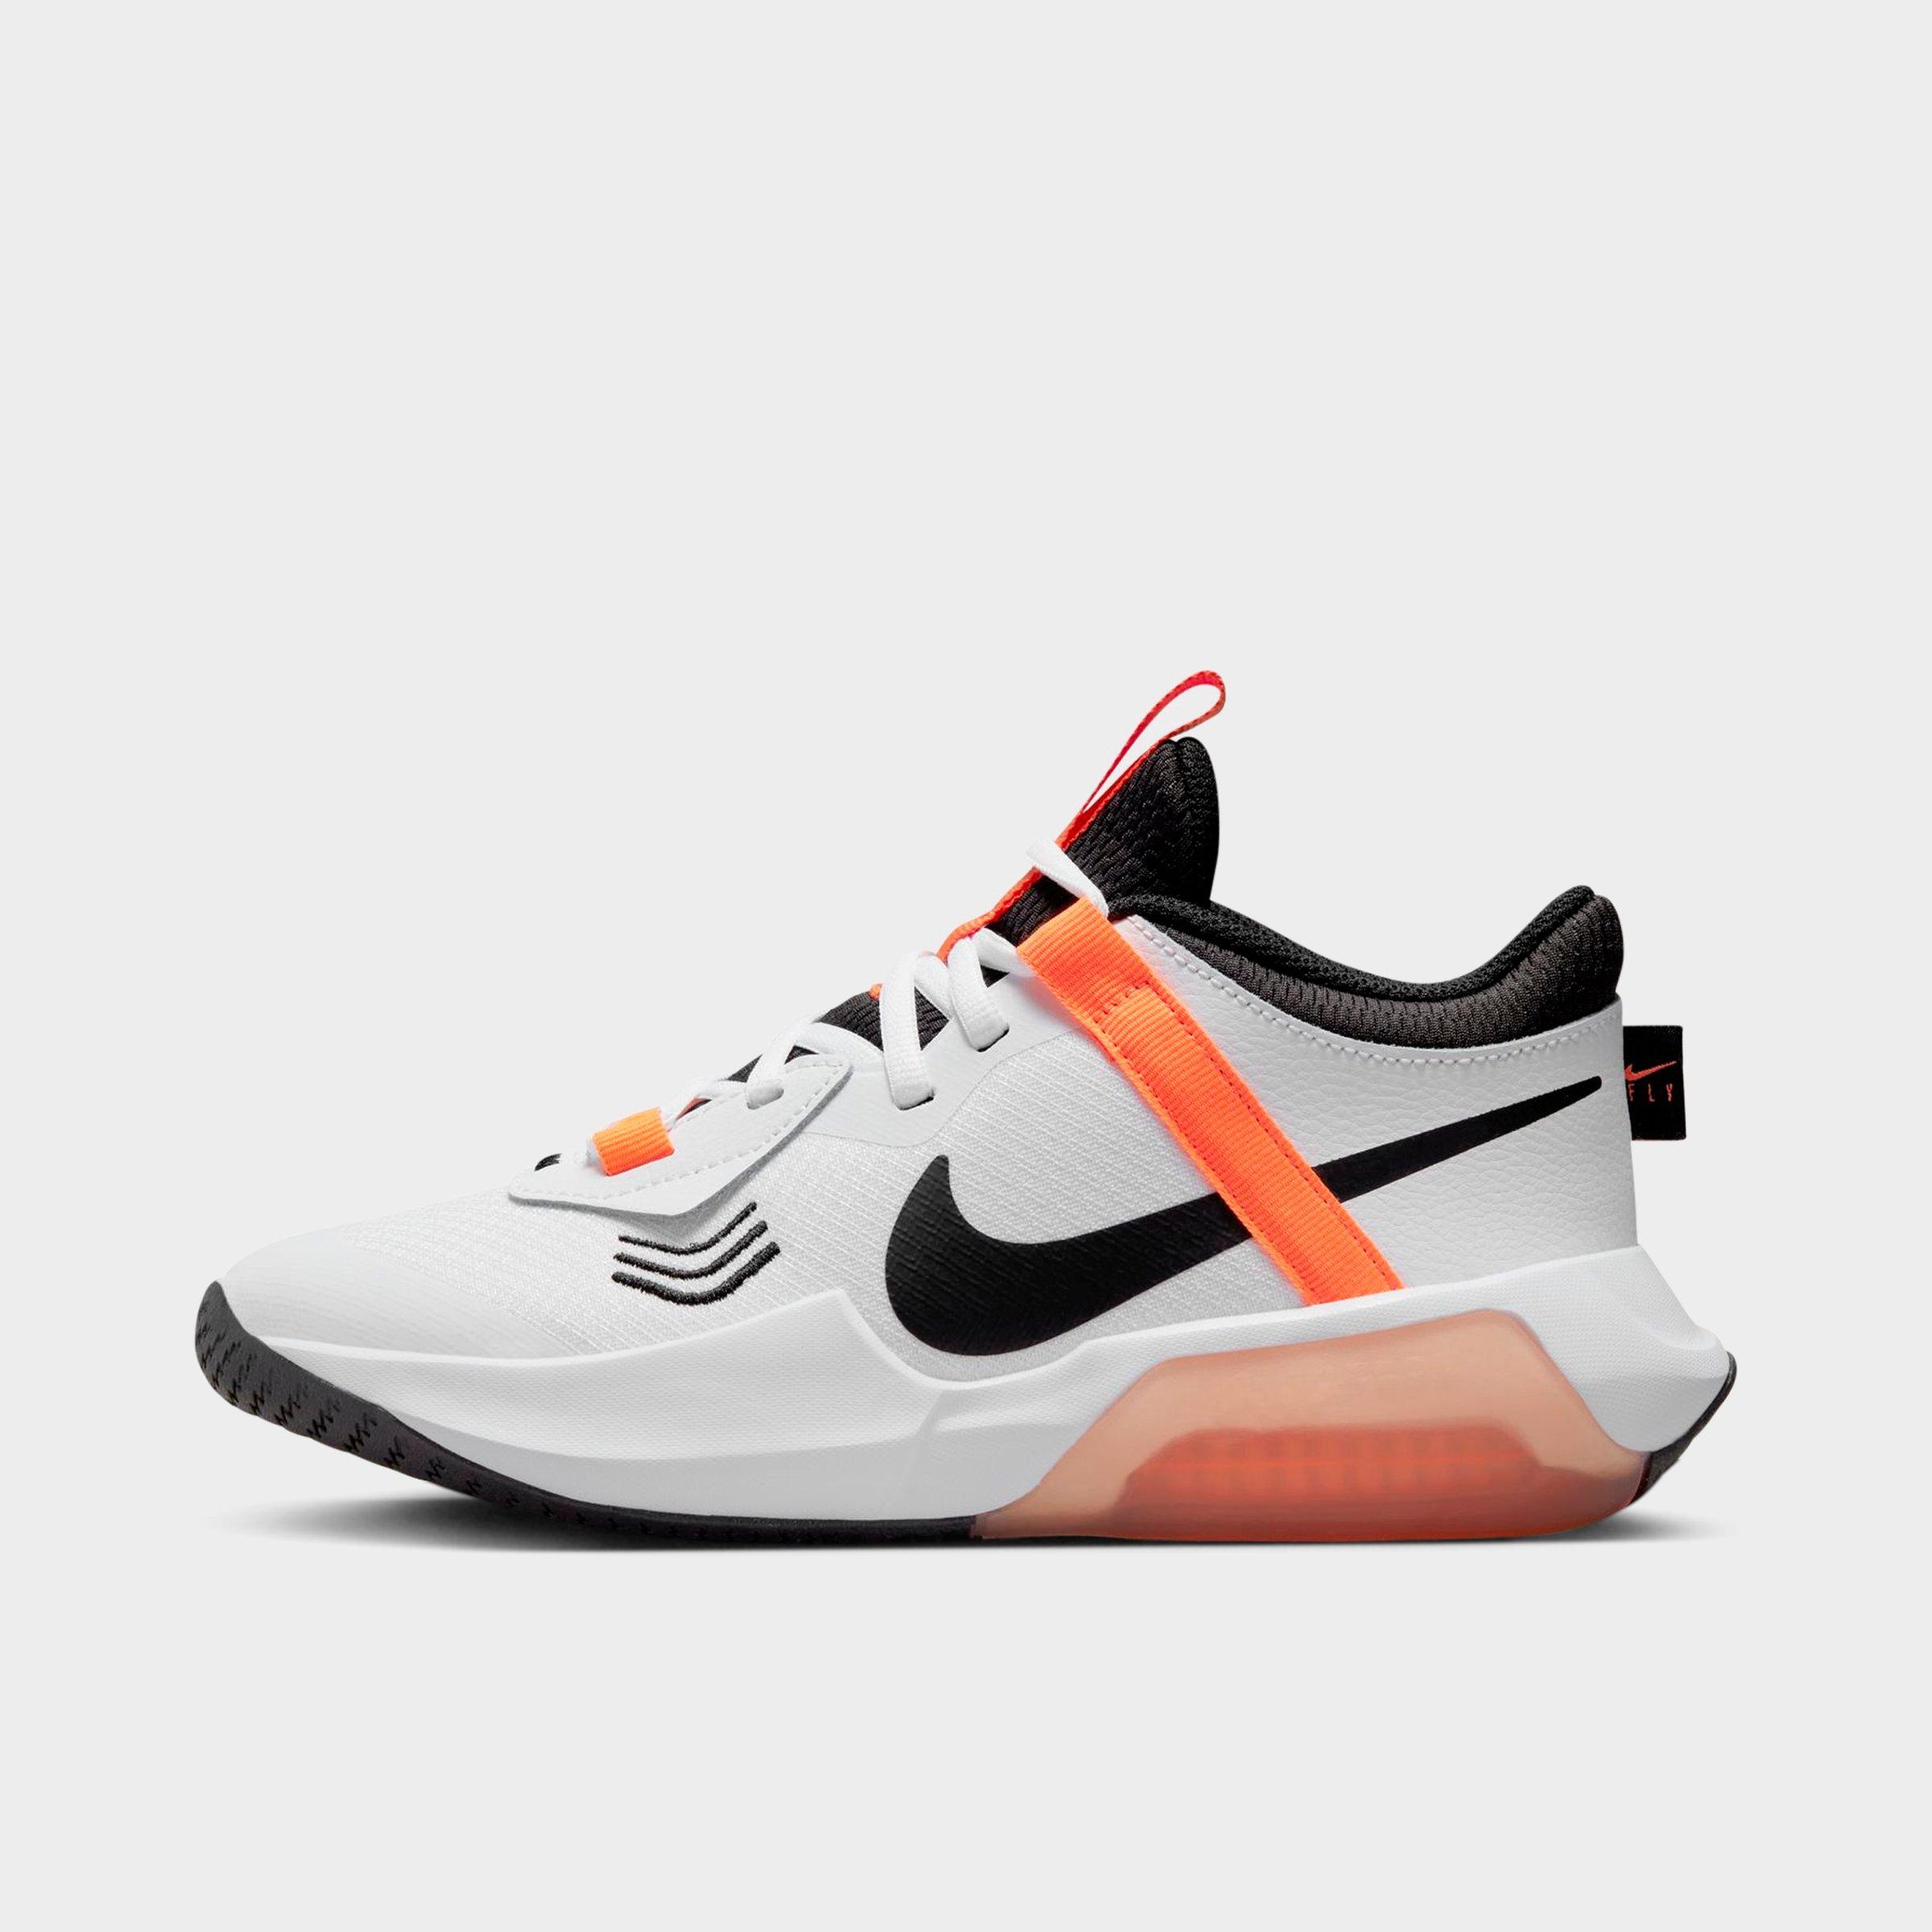 NIKE NIKE LITTLE KIDS' ZOOM AIR CROSSOVER BASKETBALL SHOES